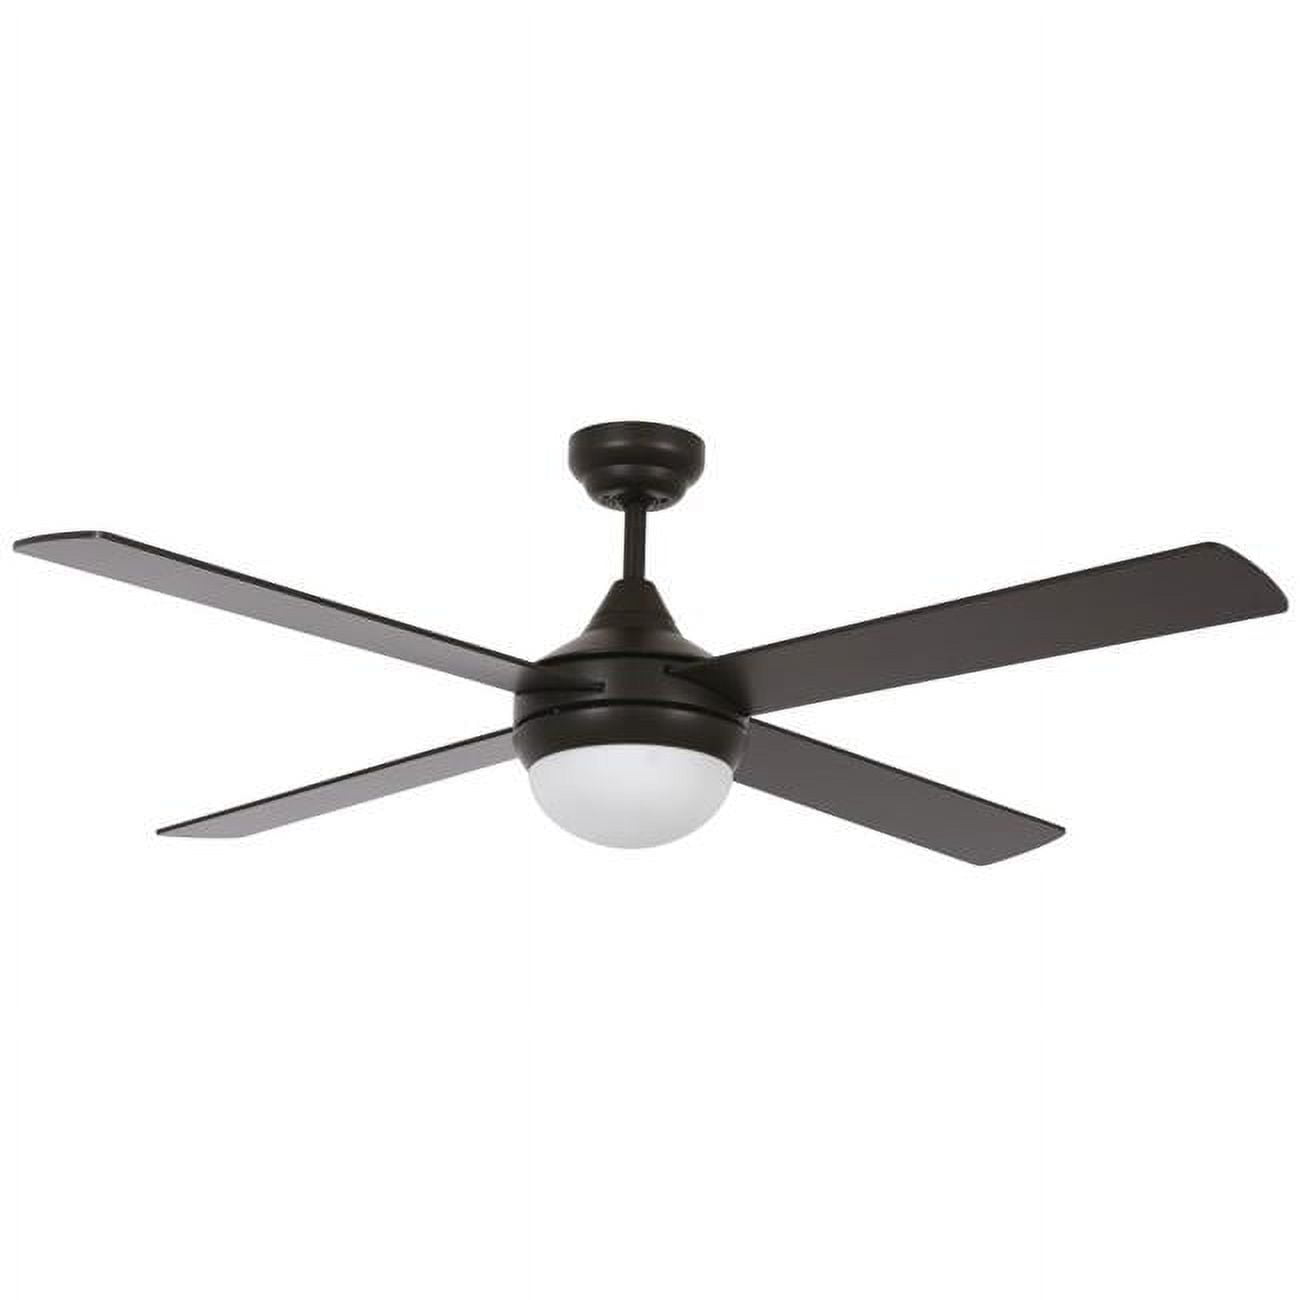 Picture of Lucci Air 21296401 52 in. Airlie II Eco Oil Rubbed Bronze Light with Remote Ceiling Fan